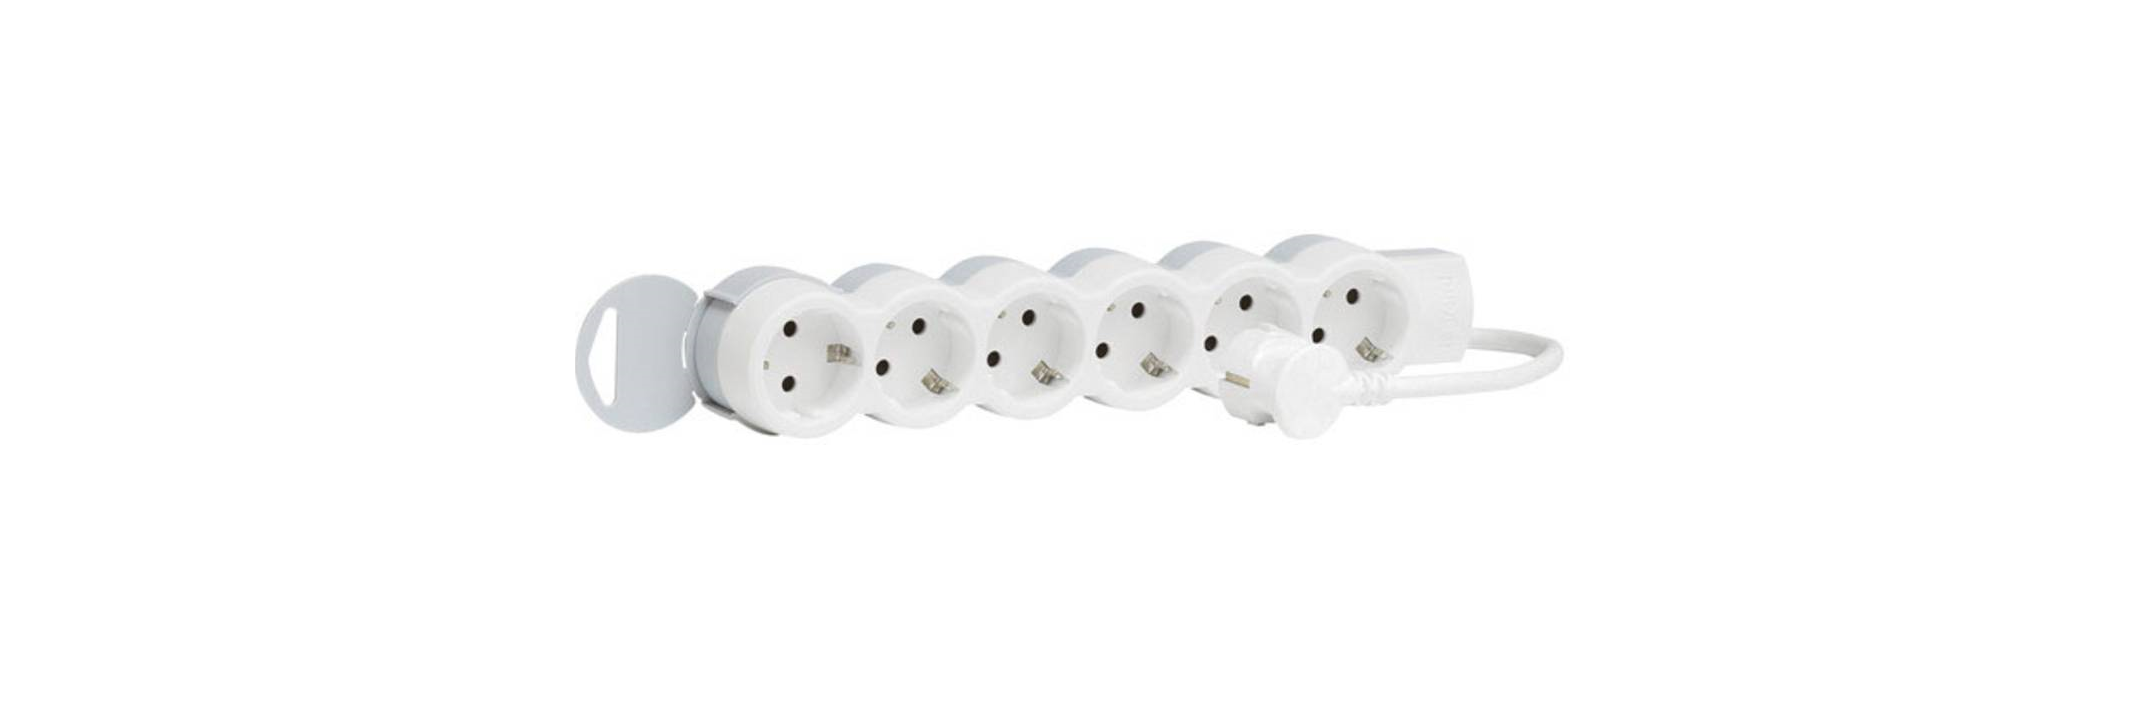 Multi-outlet extention- 6 Sockets - 6X2P+E 220V - 1.5M Cord